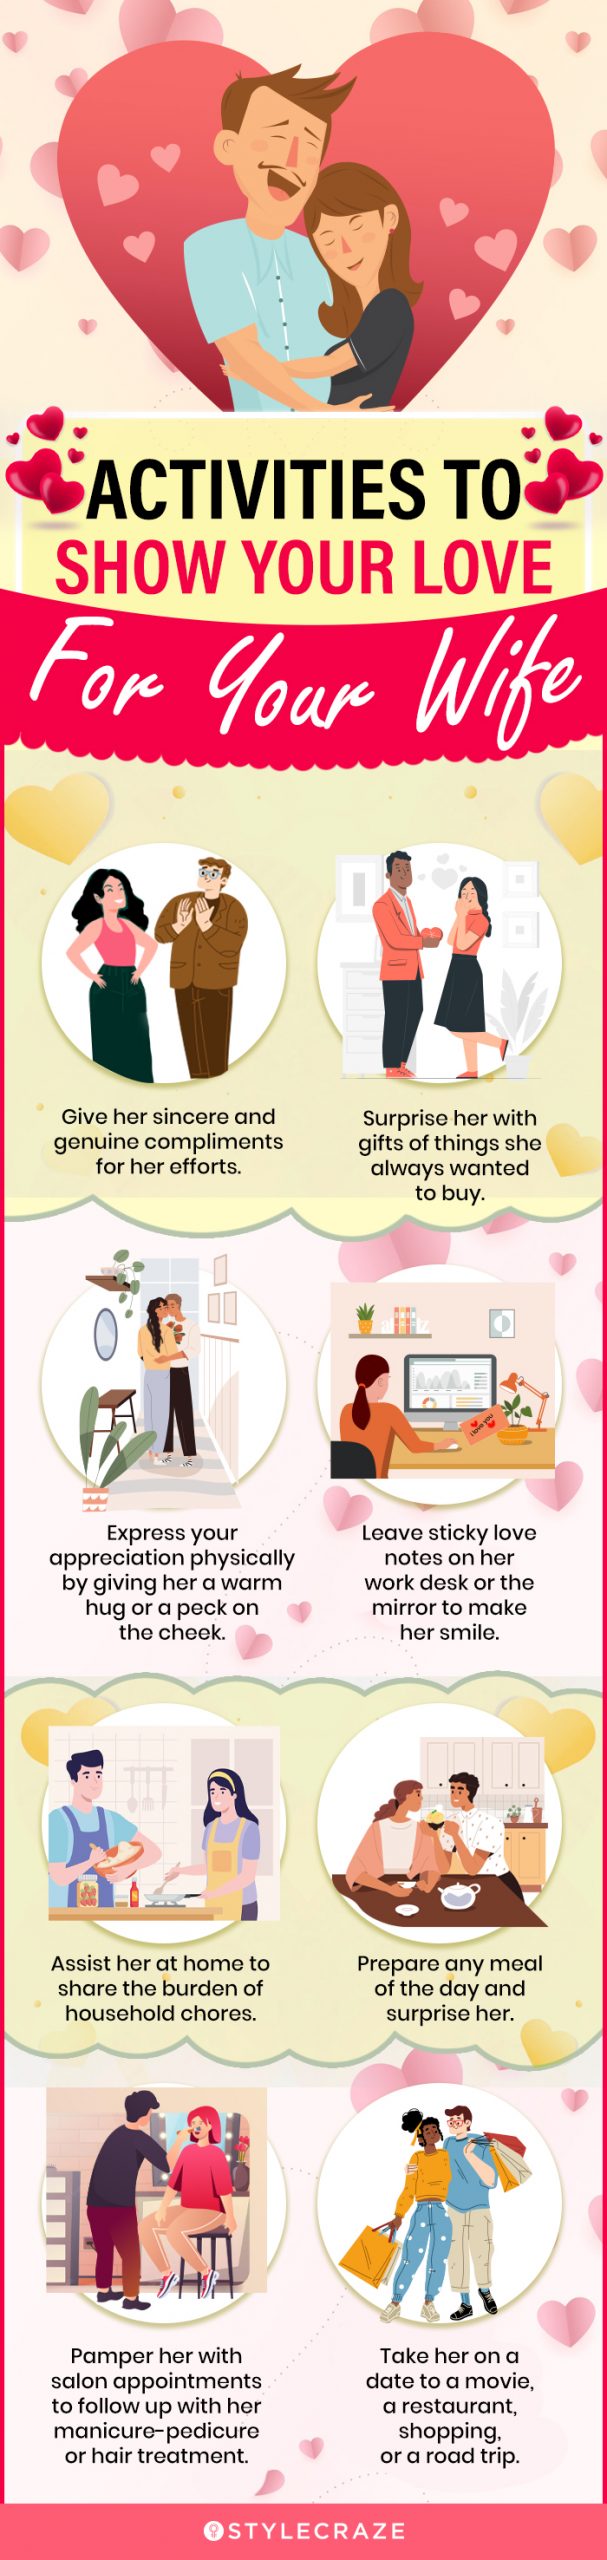 activities to show your love for your wife (infographic)